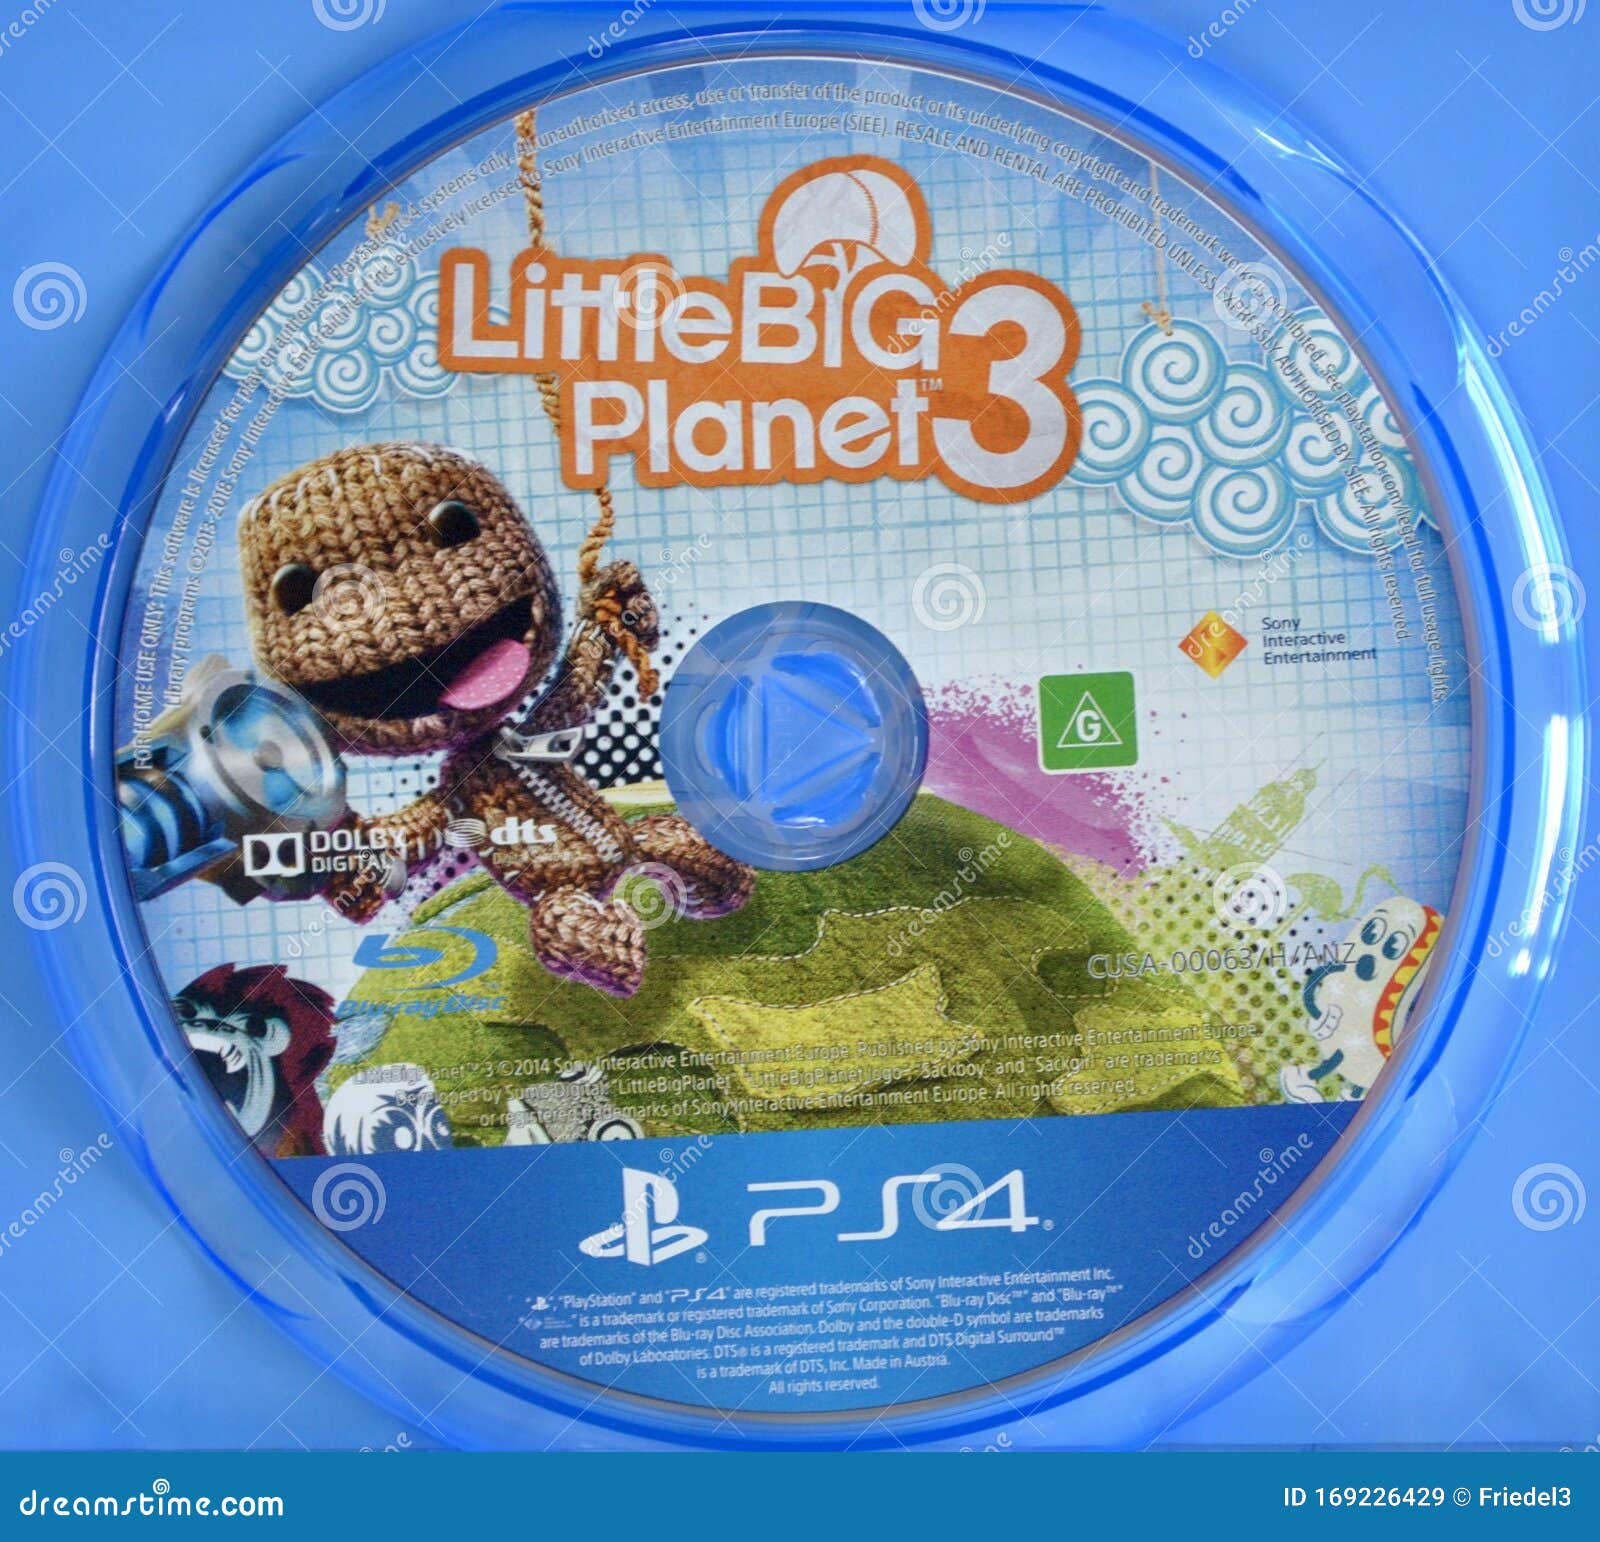 Little Big Planet 3 Ps4 Game Disc Editorial Stock Image Image Of Childfriendly Plastic